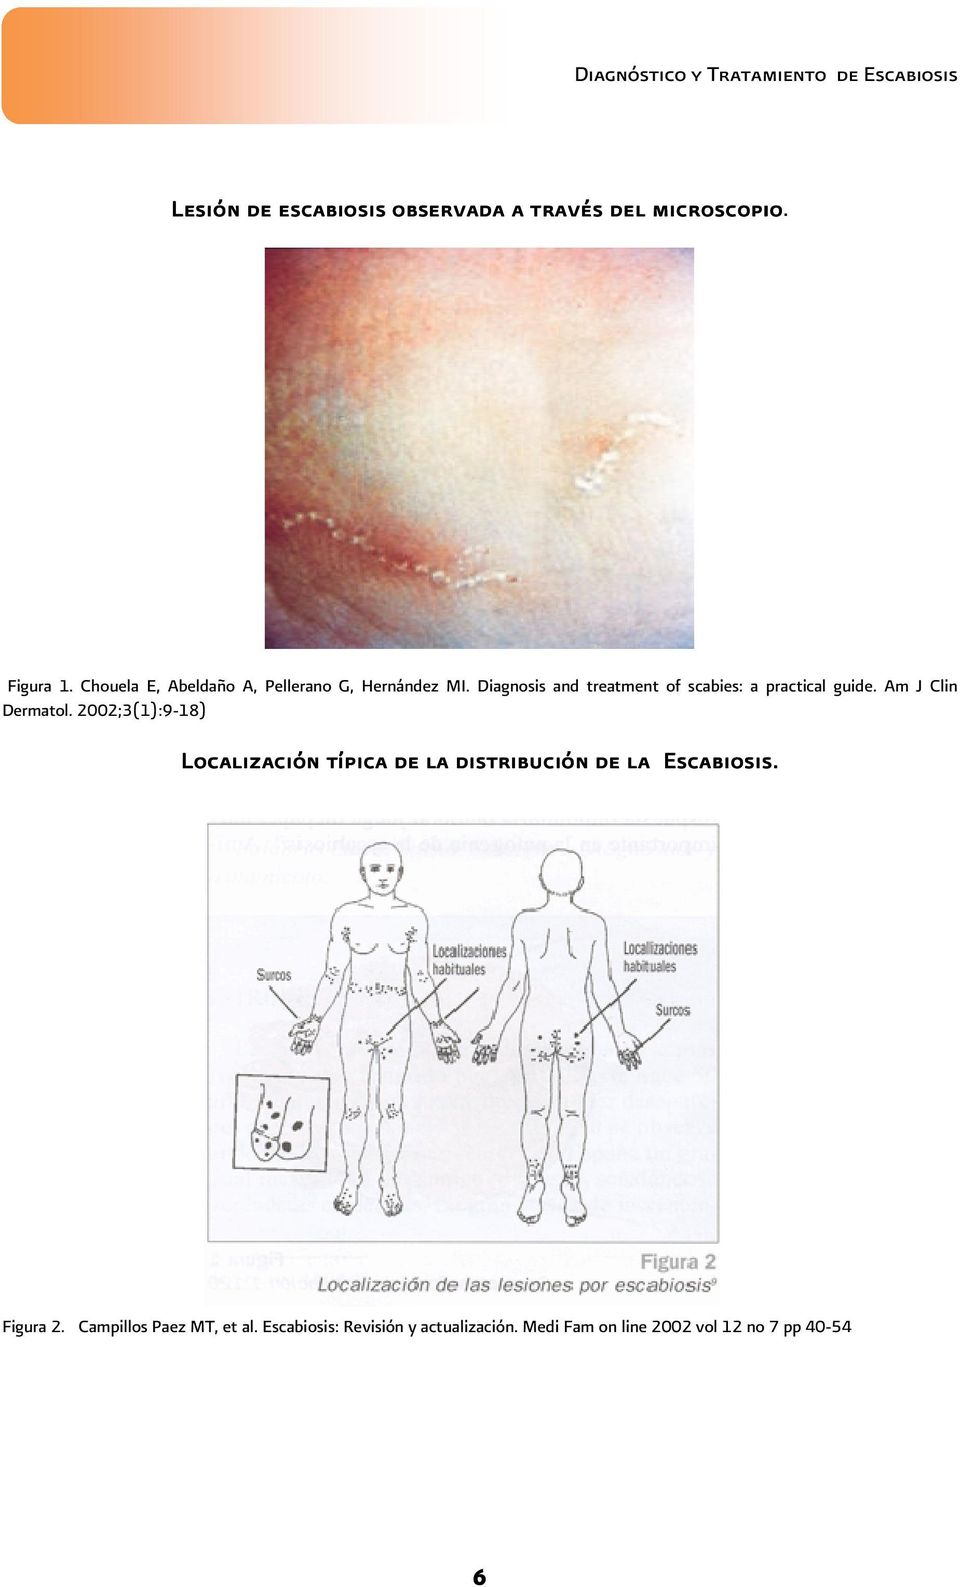 Diagnosis and treatment of scabies: a practical guide. Am J Clin Dermatol.